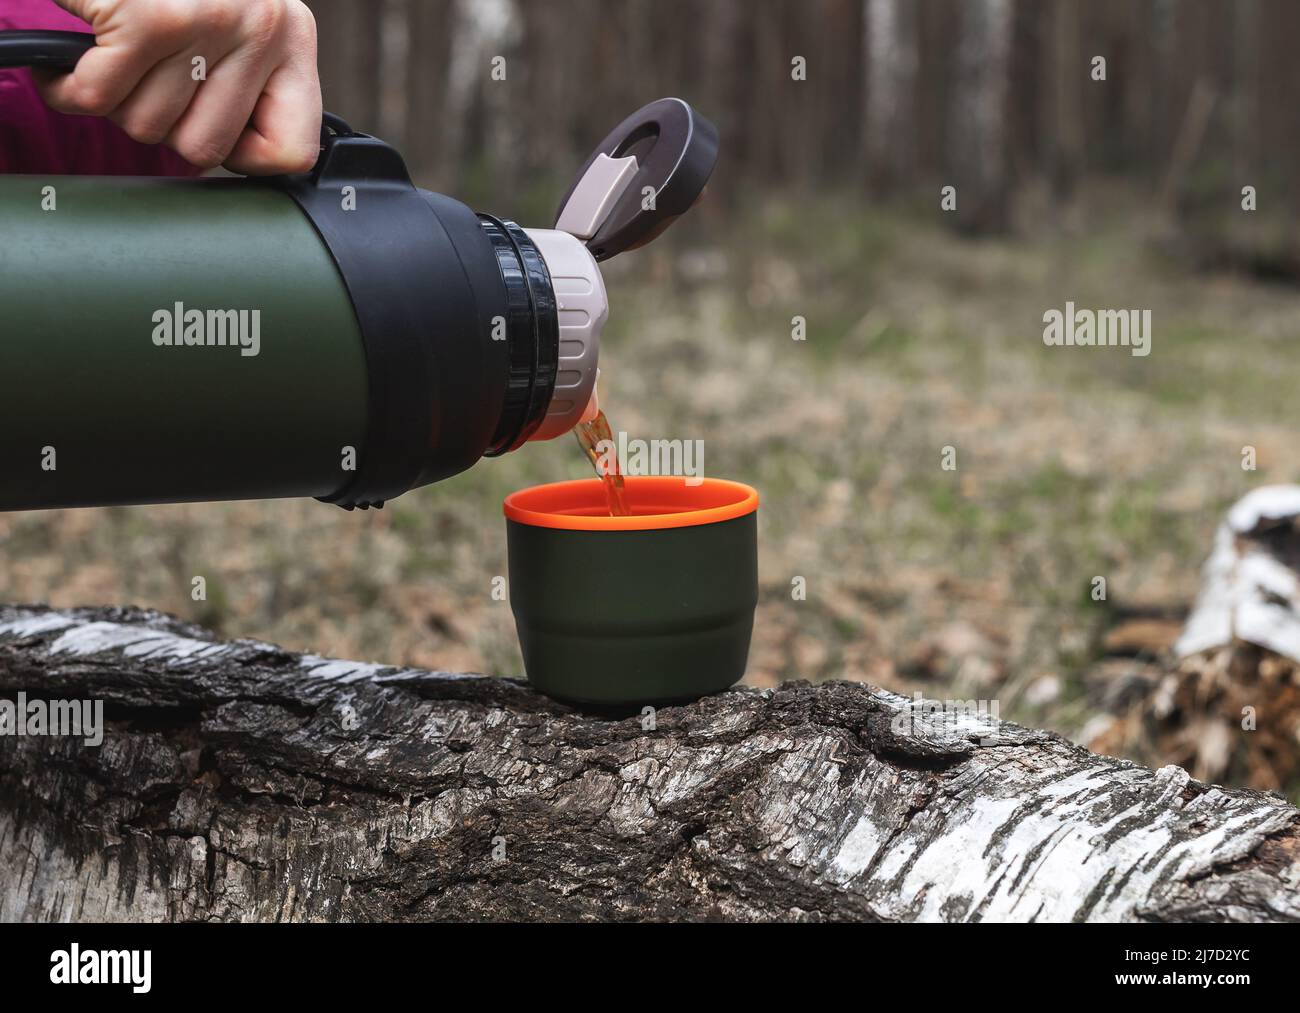 https://c8.alamy.com/comp/2J7D2YC/woman-hands-pouring-tea-from-thermos-into-mug-on-nature-background-hot-beverage-break-during-camping-in-autumn-or-spring-forest-insulated-bottle-using-during-outdoor-activities-high-quality-photo-2J7D2YC.jpg